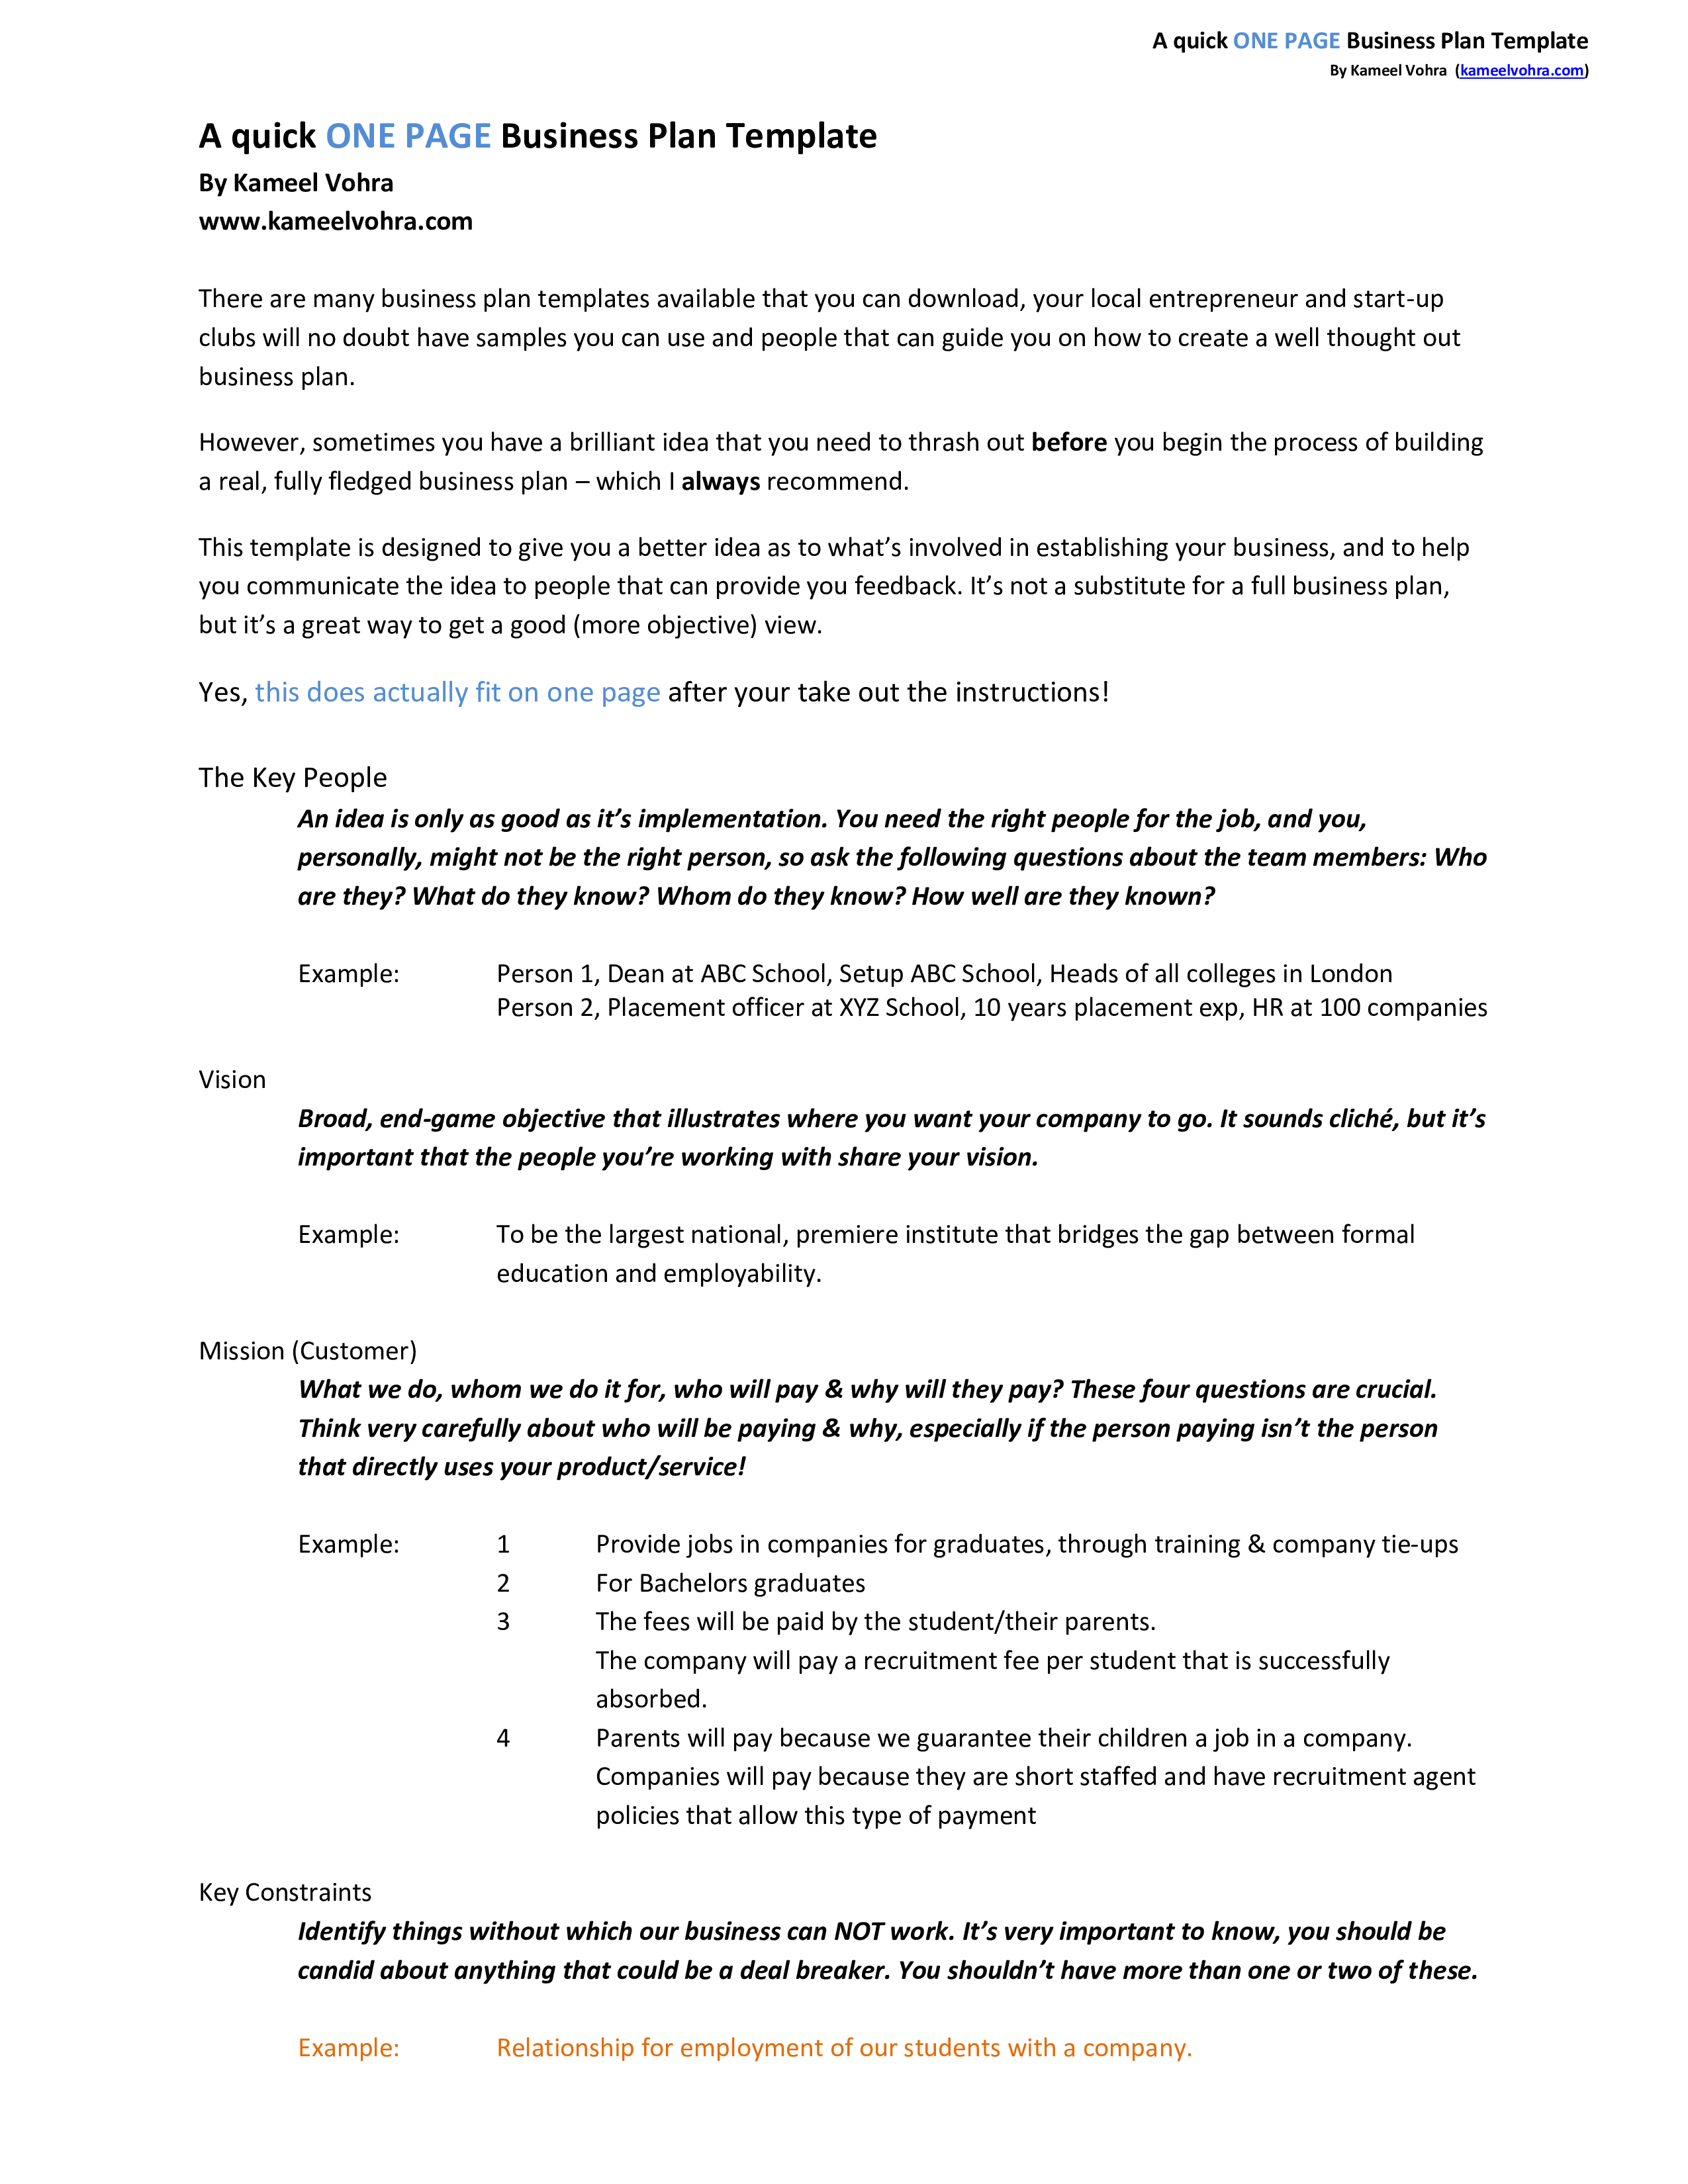 A Quick One Page Business Plan Template - Eloquens For Free Agriculture Business Plan Template